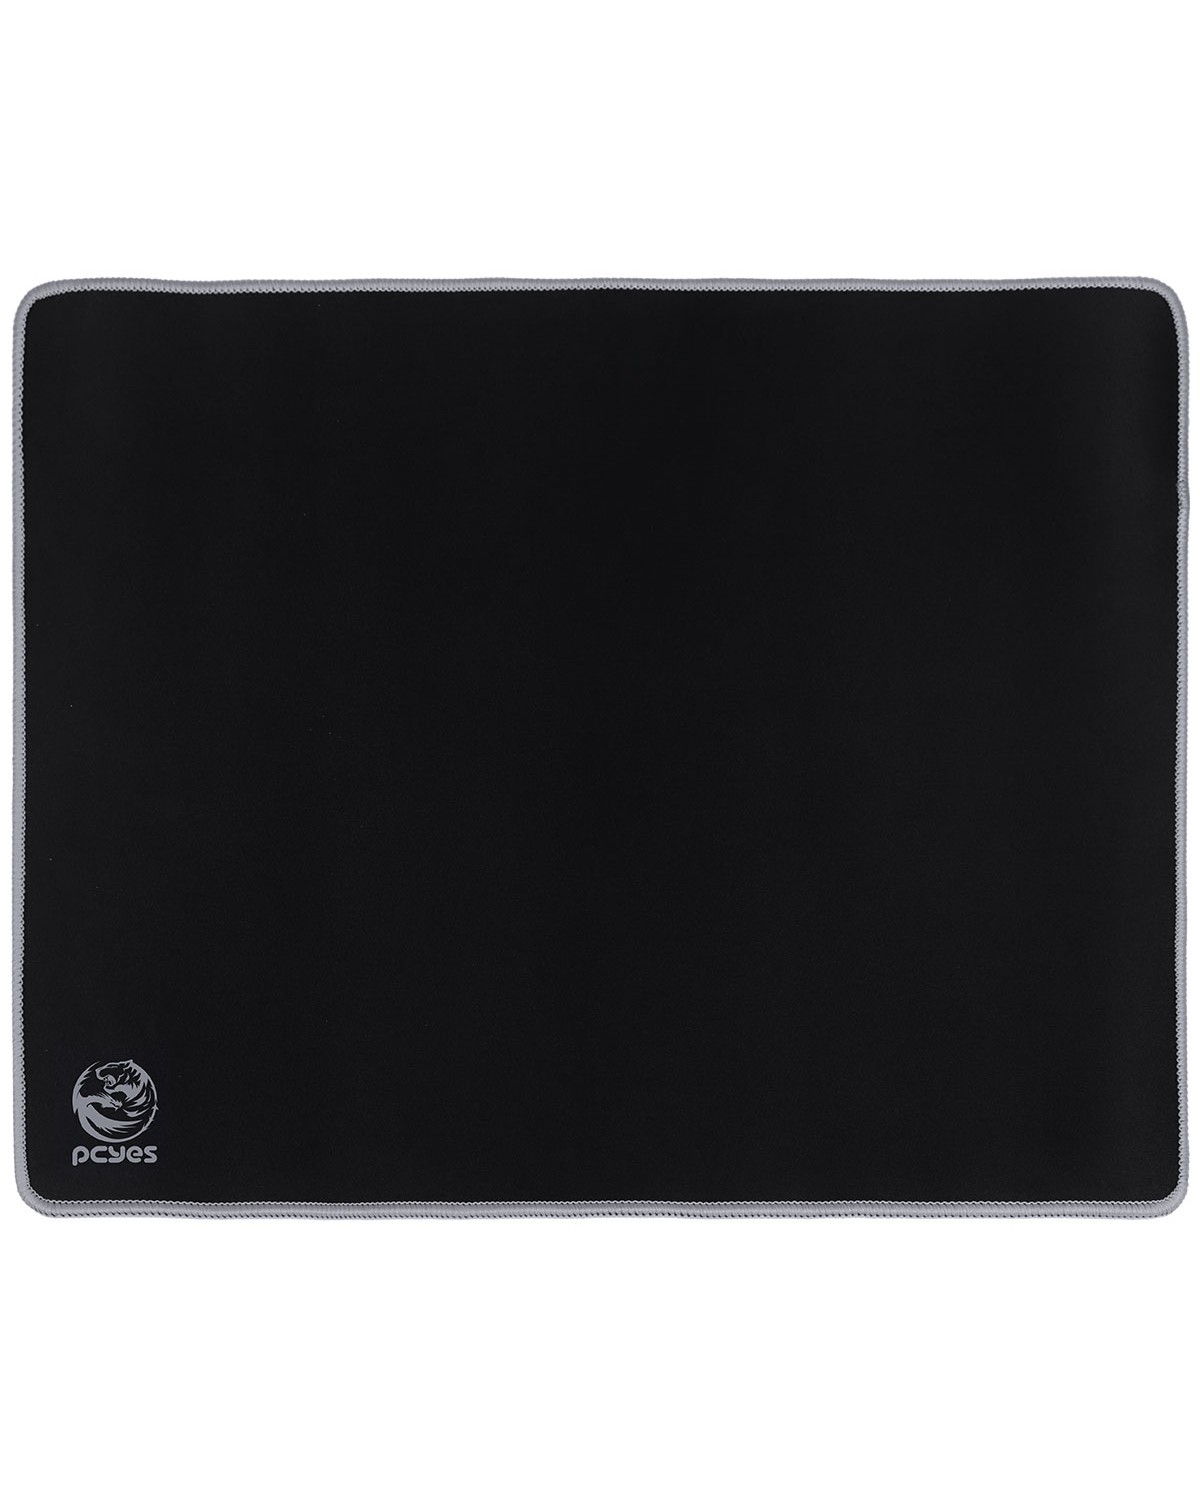 MOUSE PAD COLORS GRAY STANDARD - ESTILO SPEED CINZA - 360X300MM - PMC36X30GY